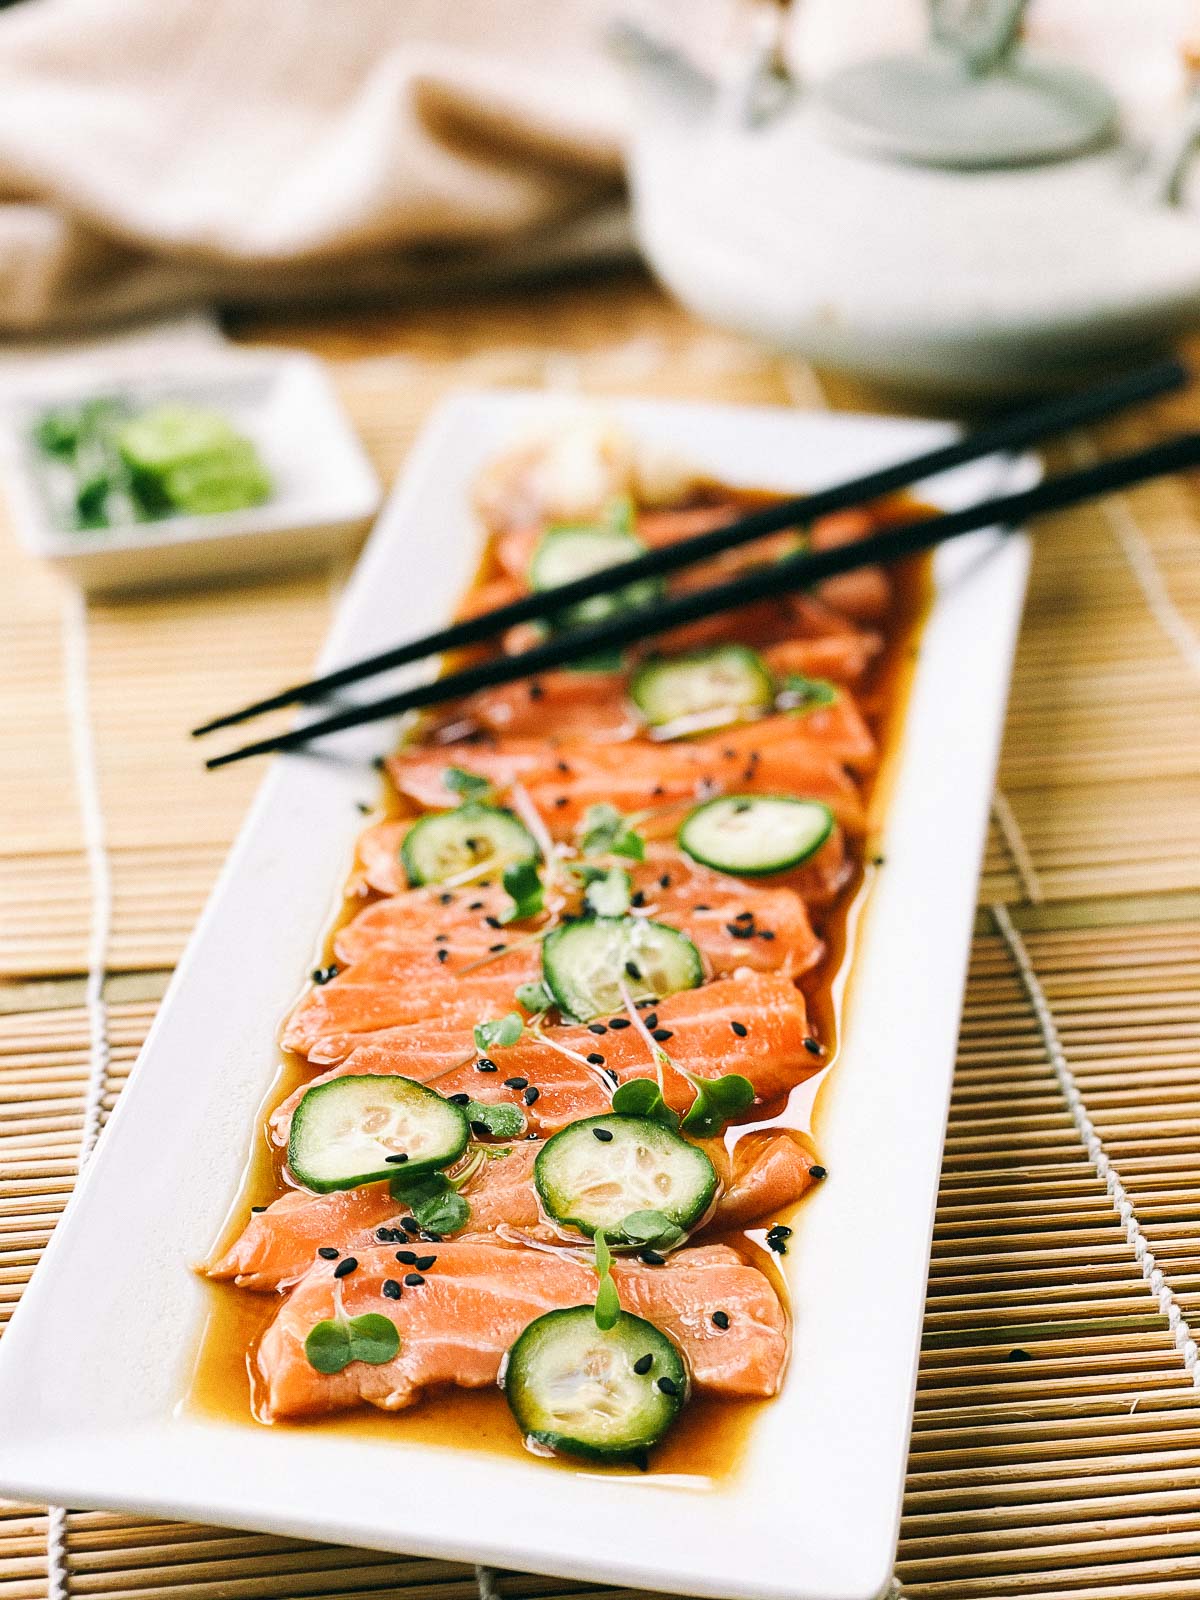 Slices of fresh sashimi salmon on a white platter with sliced cucumbers on top and sprinkles of black sesame seeds, with black chopsticks, a Japanese tea kettle, and a small white bowl of green wasabi on the side.